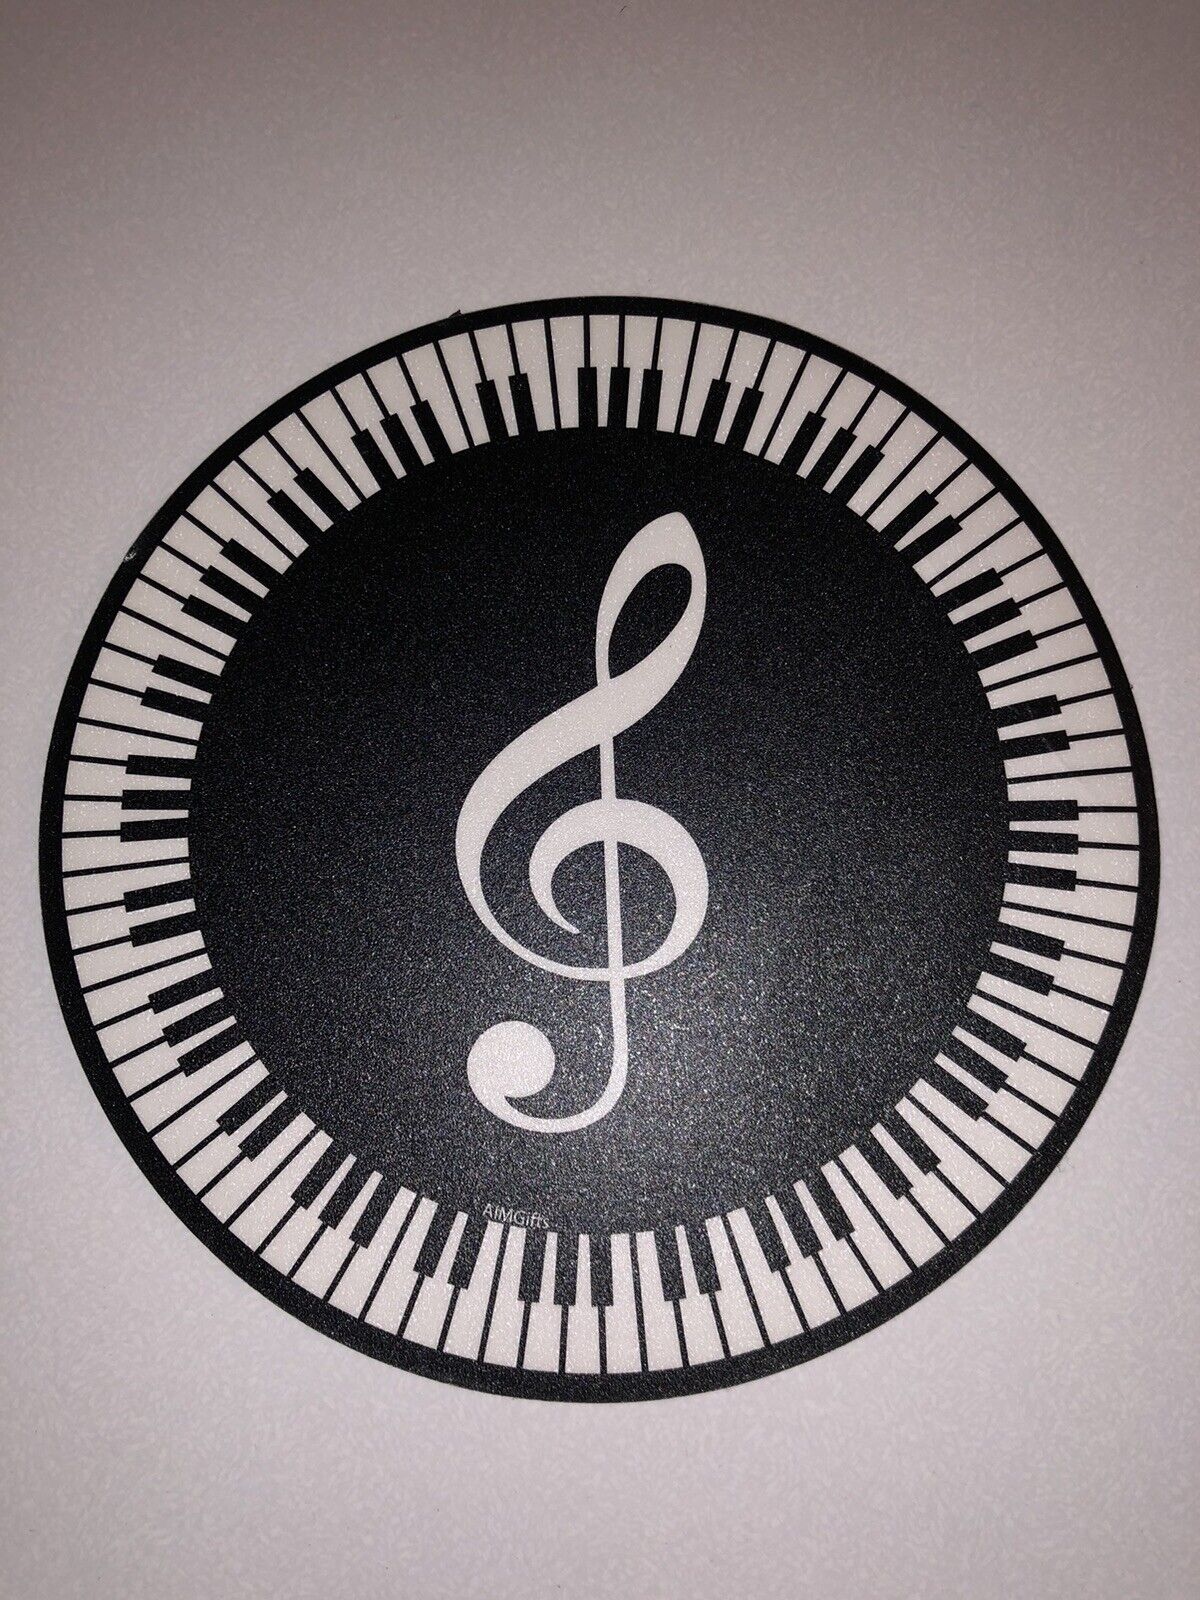 Round Treble Clef Piano Keyboard Mouse Pad G Clef Piano Mouse Pad NEW SHIPS FAST